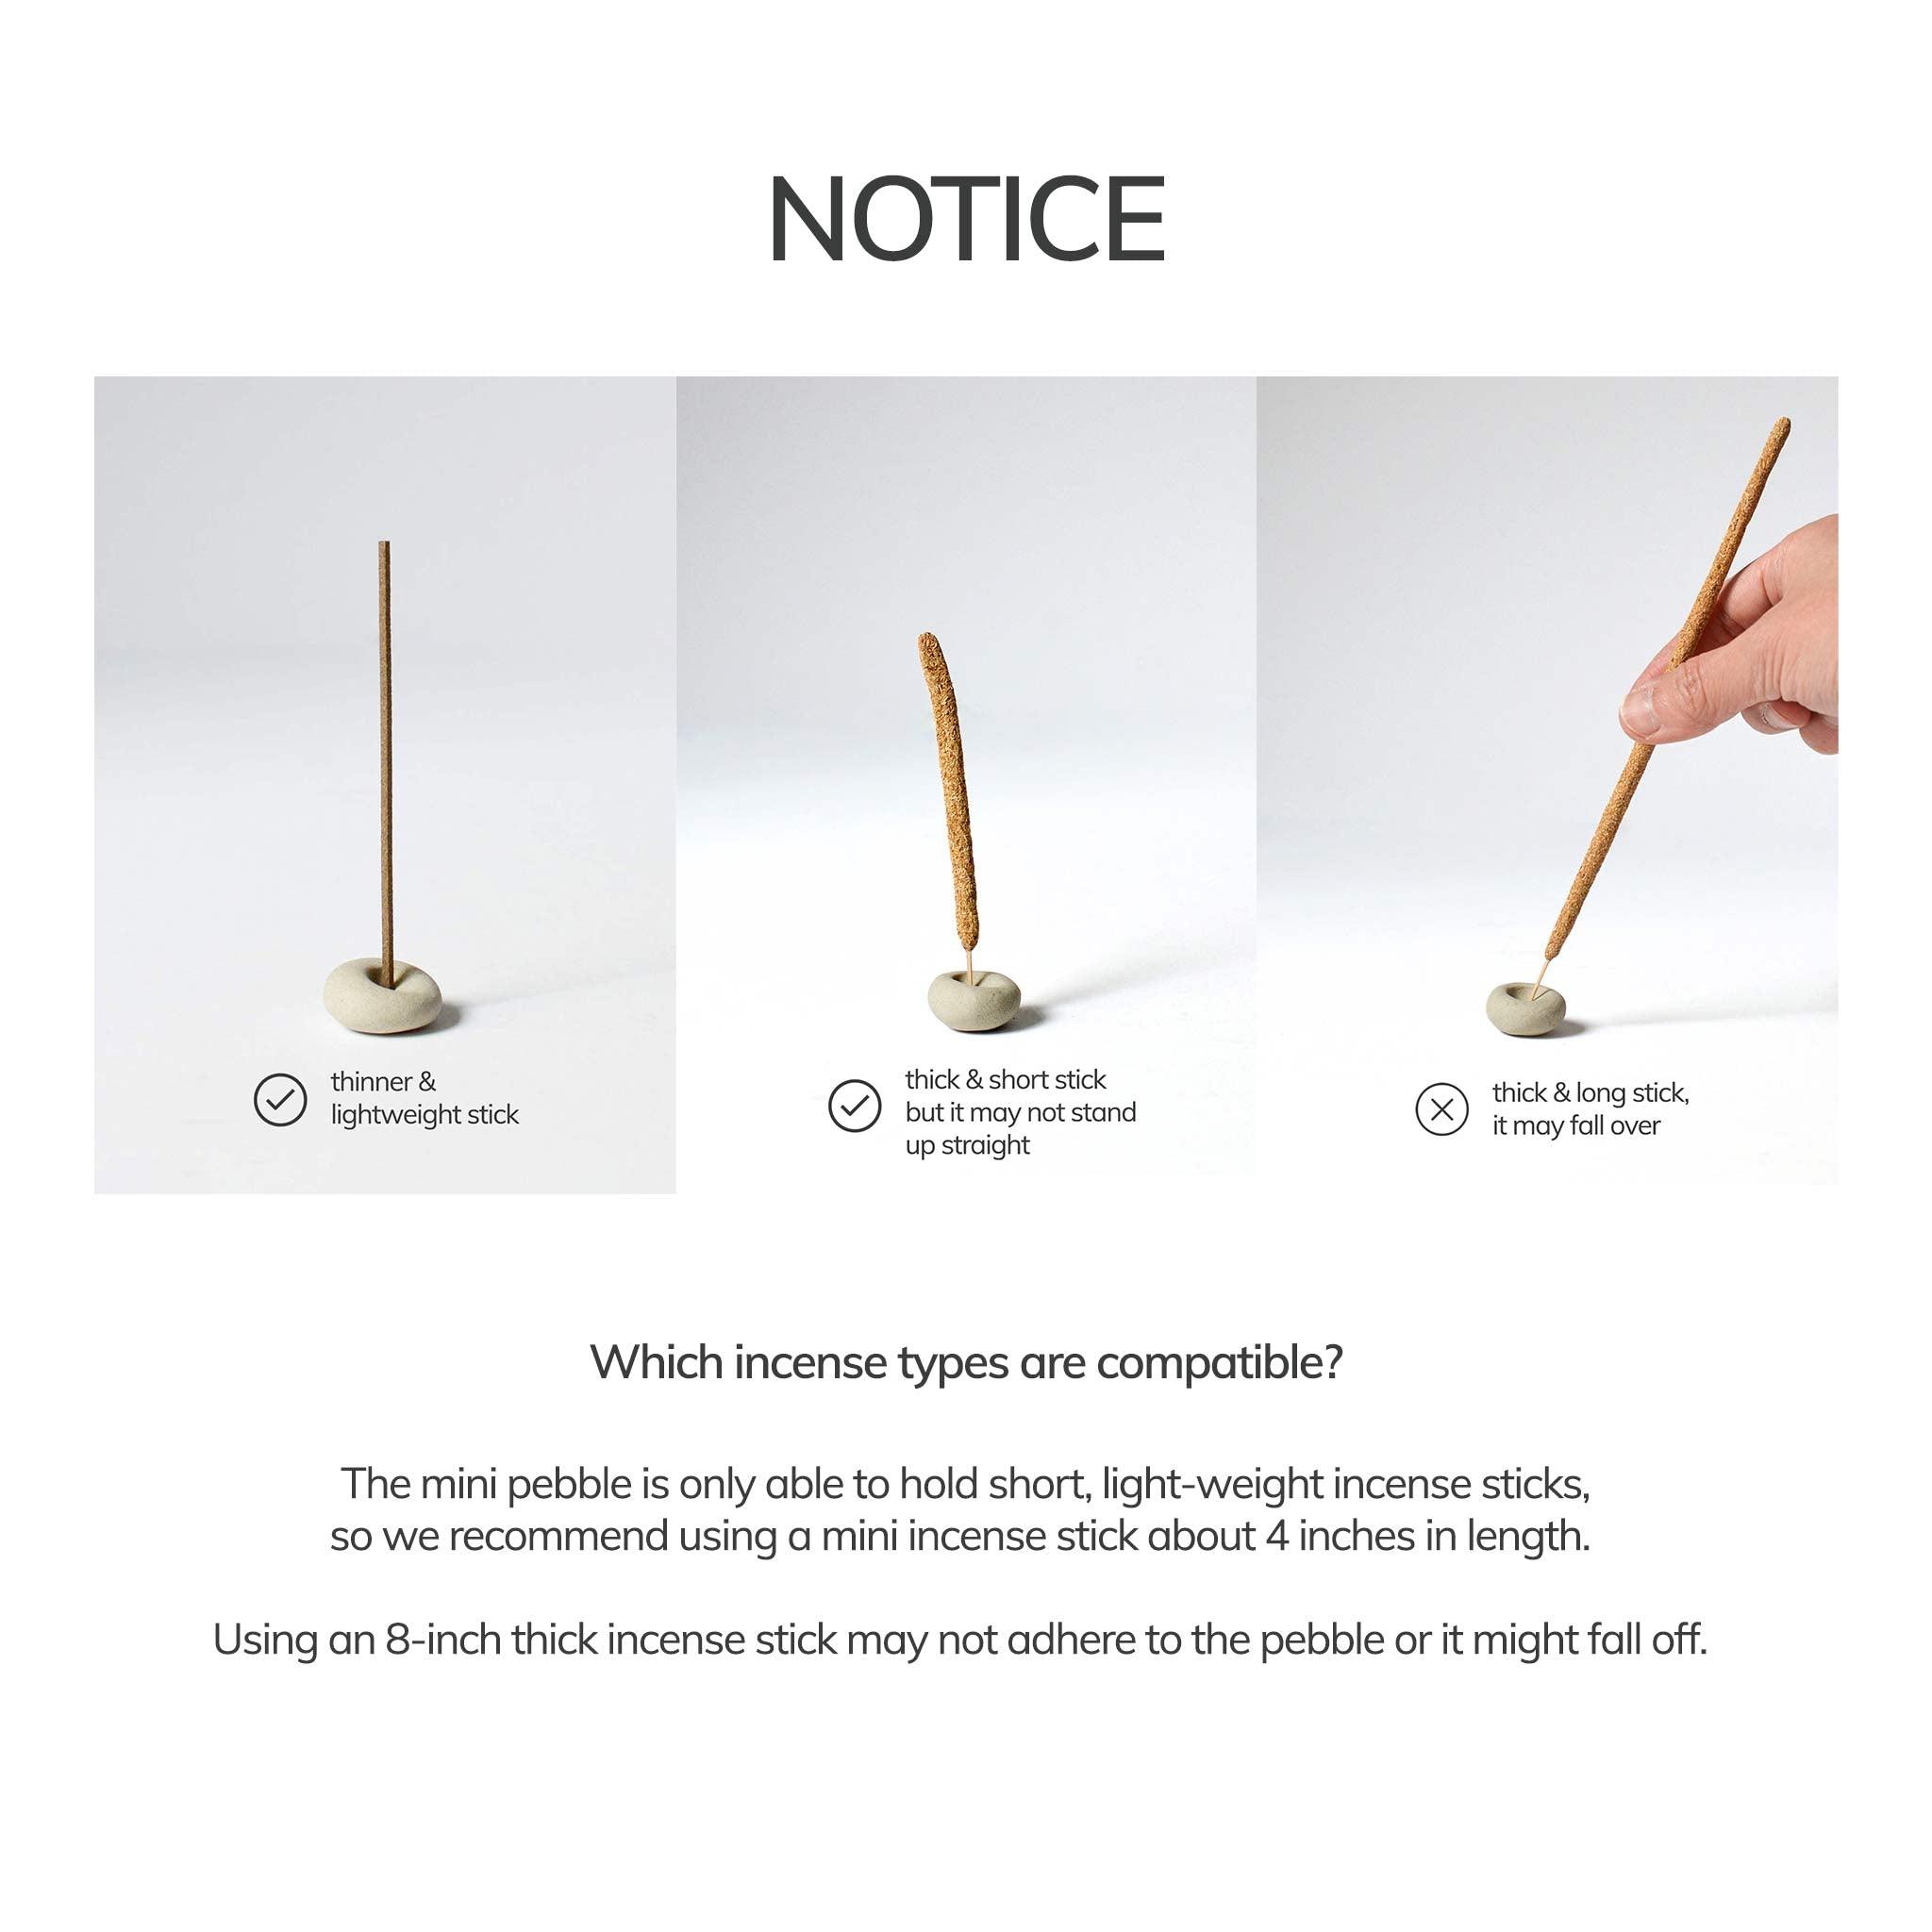 1. short and light-weight incense stick with pebble-shaped incense holder, 2. incense stick with pebble-shaped incense holder, 3. holding long incense stick with pebble-shaped ceramic incense holder